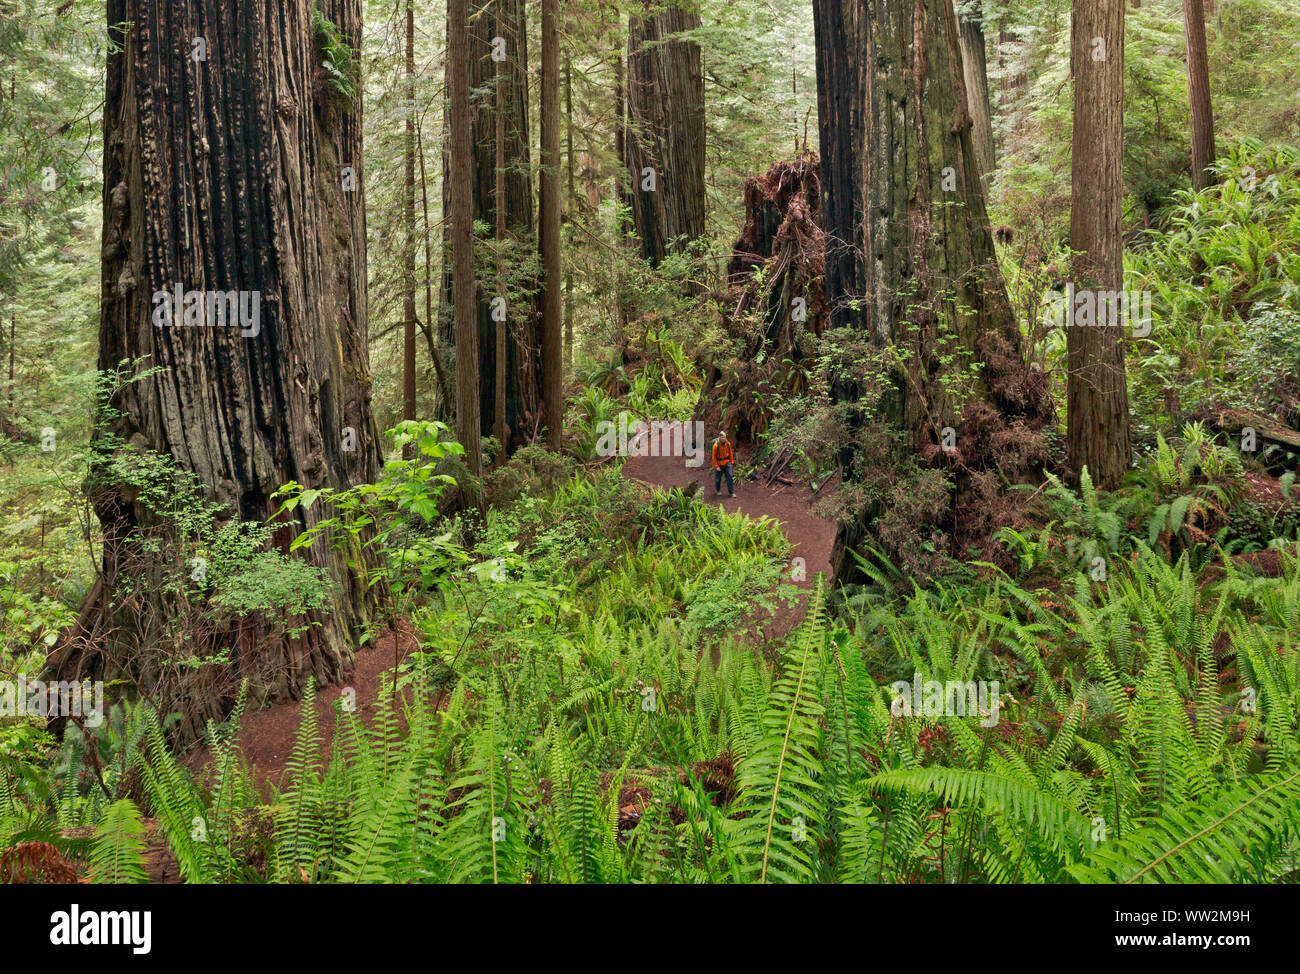 CA03556-00...CALIFORNIA - Hiker walking through a forest of massive redwood trees along the James Irvine Trail Prairie Creek Redwoods State Park. Stock Photo